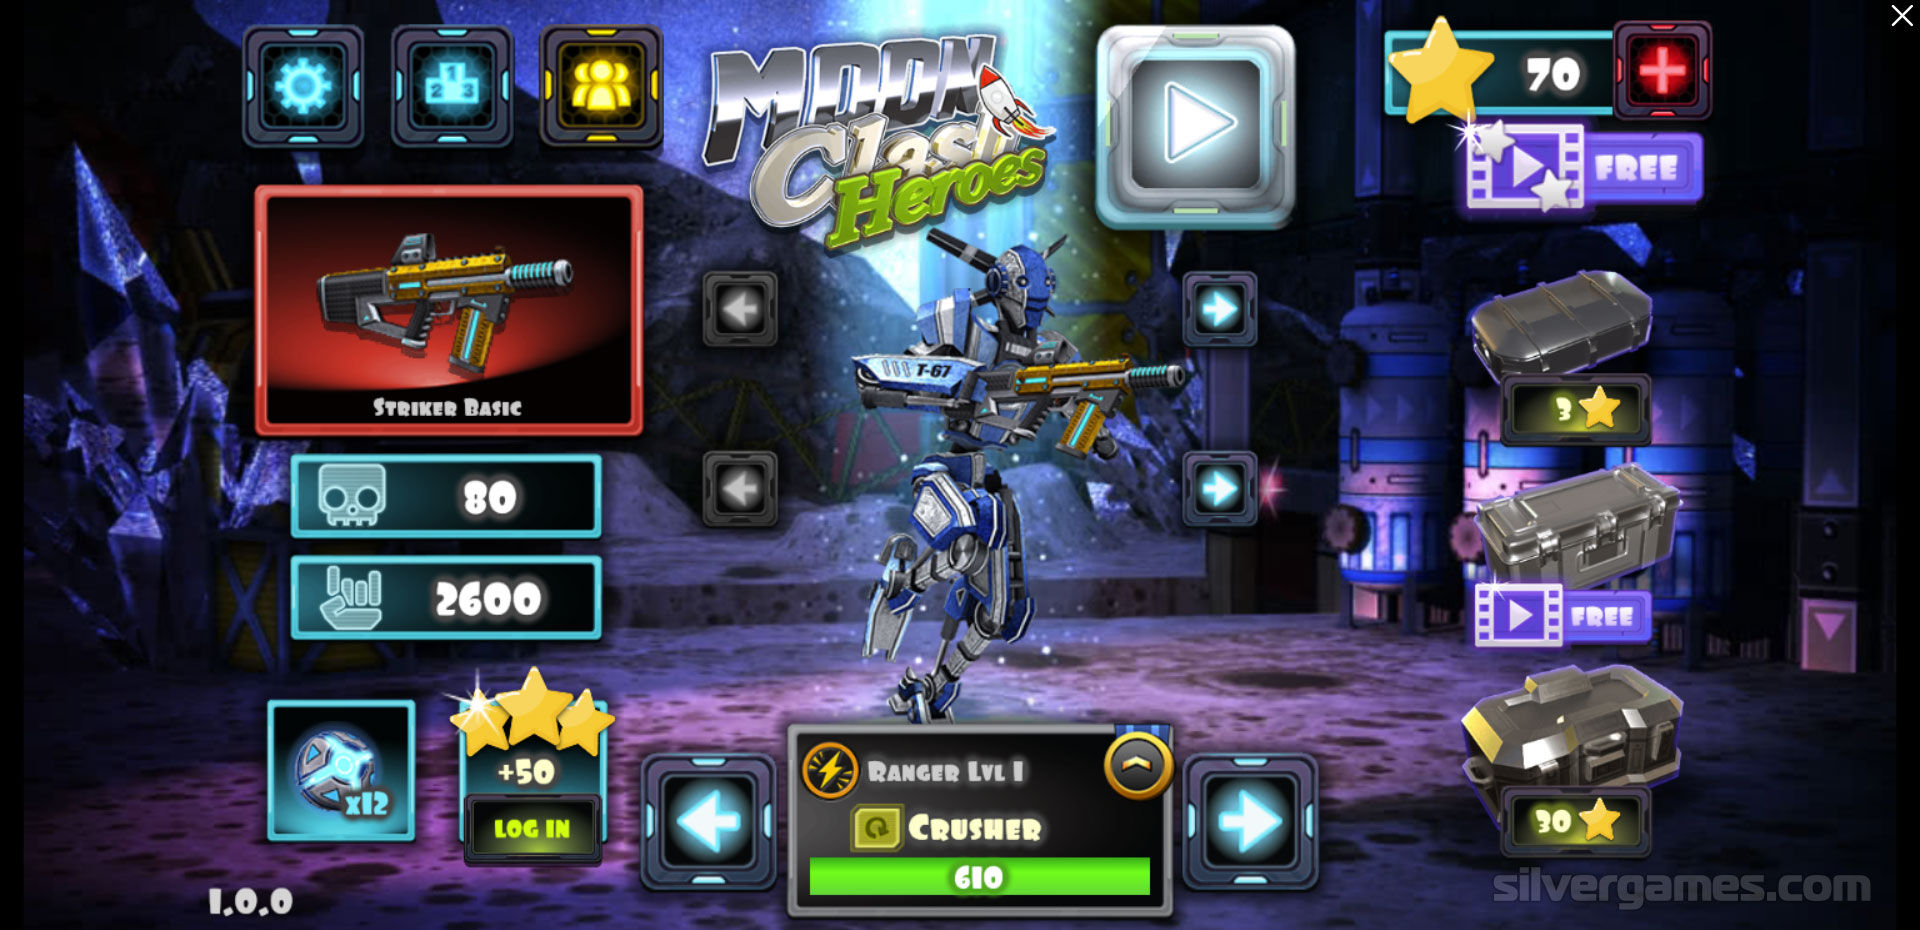 Moon Clash Heroes 🕹️ Play on CrazyGames